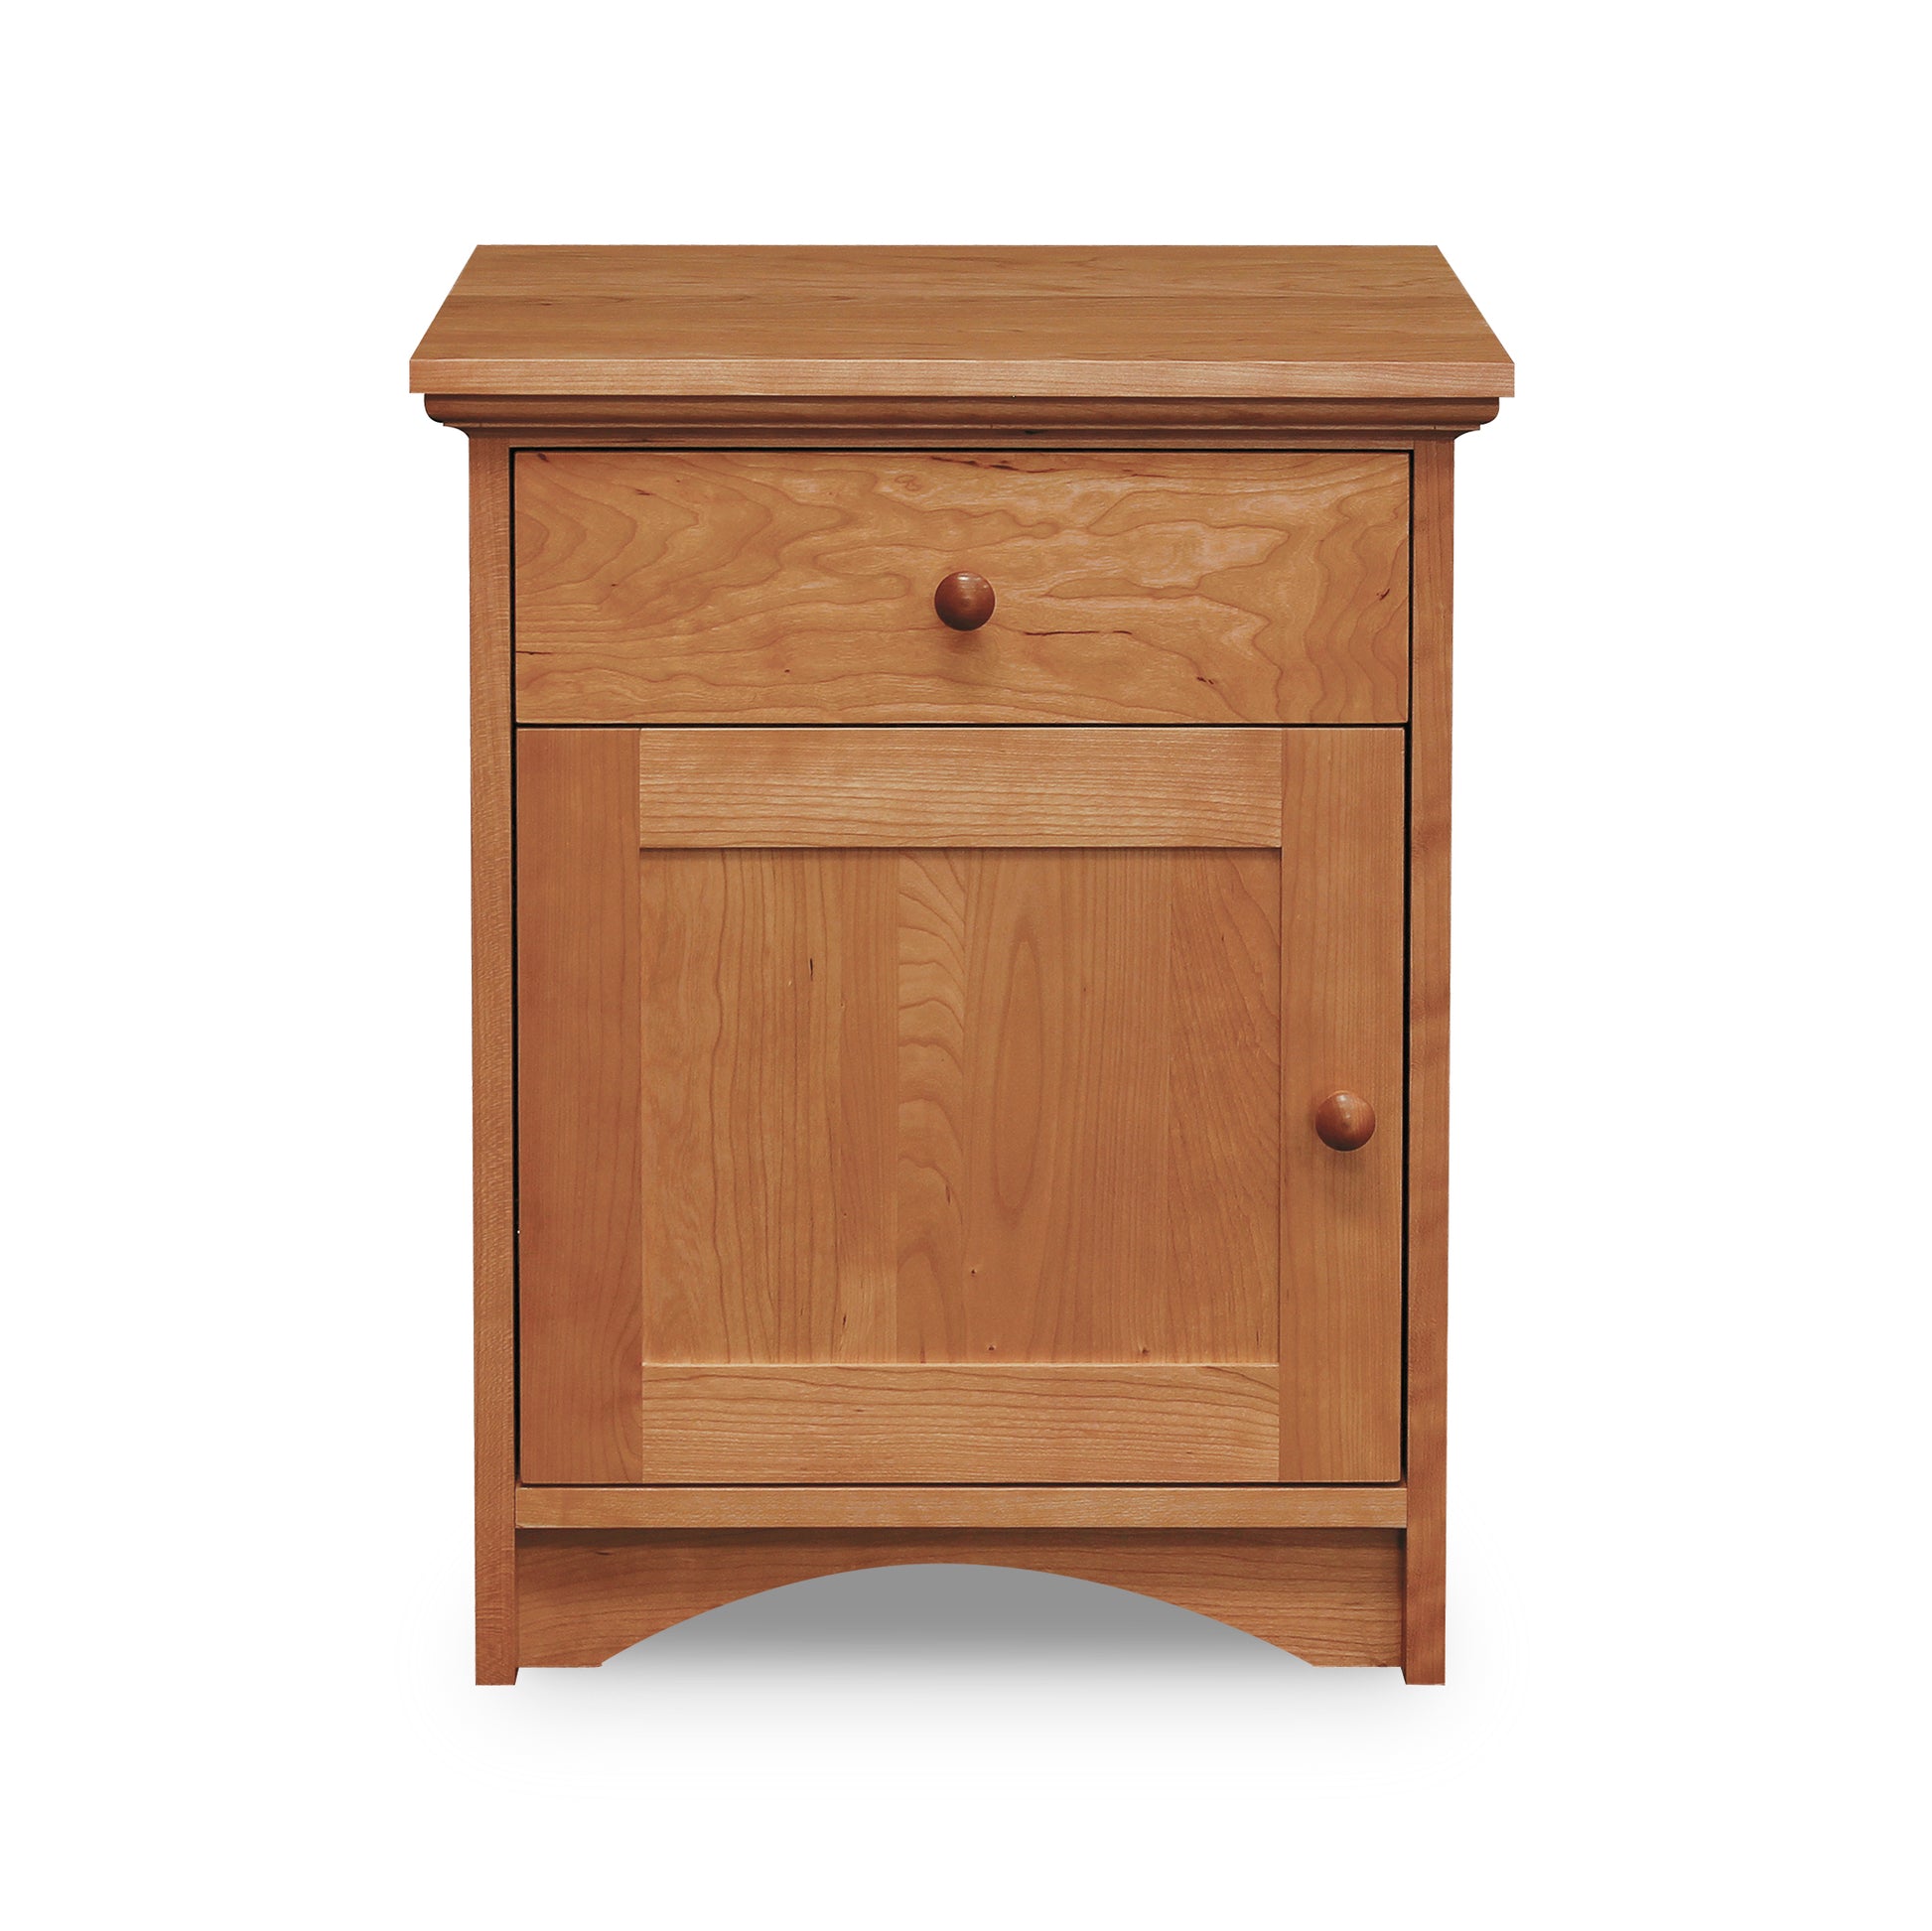 A small wooden Lyndon Furniture New England Shaker 1-Drawer Nightstand with Door and Arched Base, made of hardwood in the New England Shaker style.